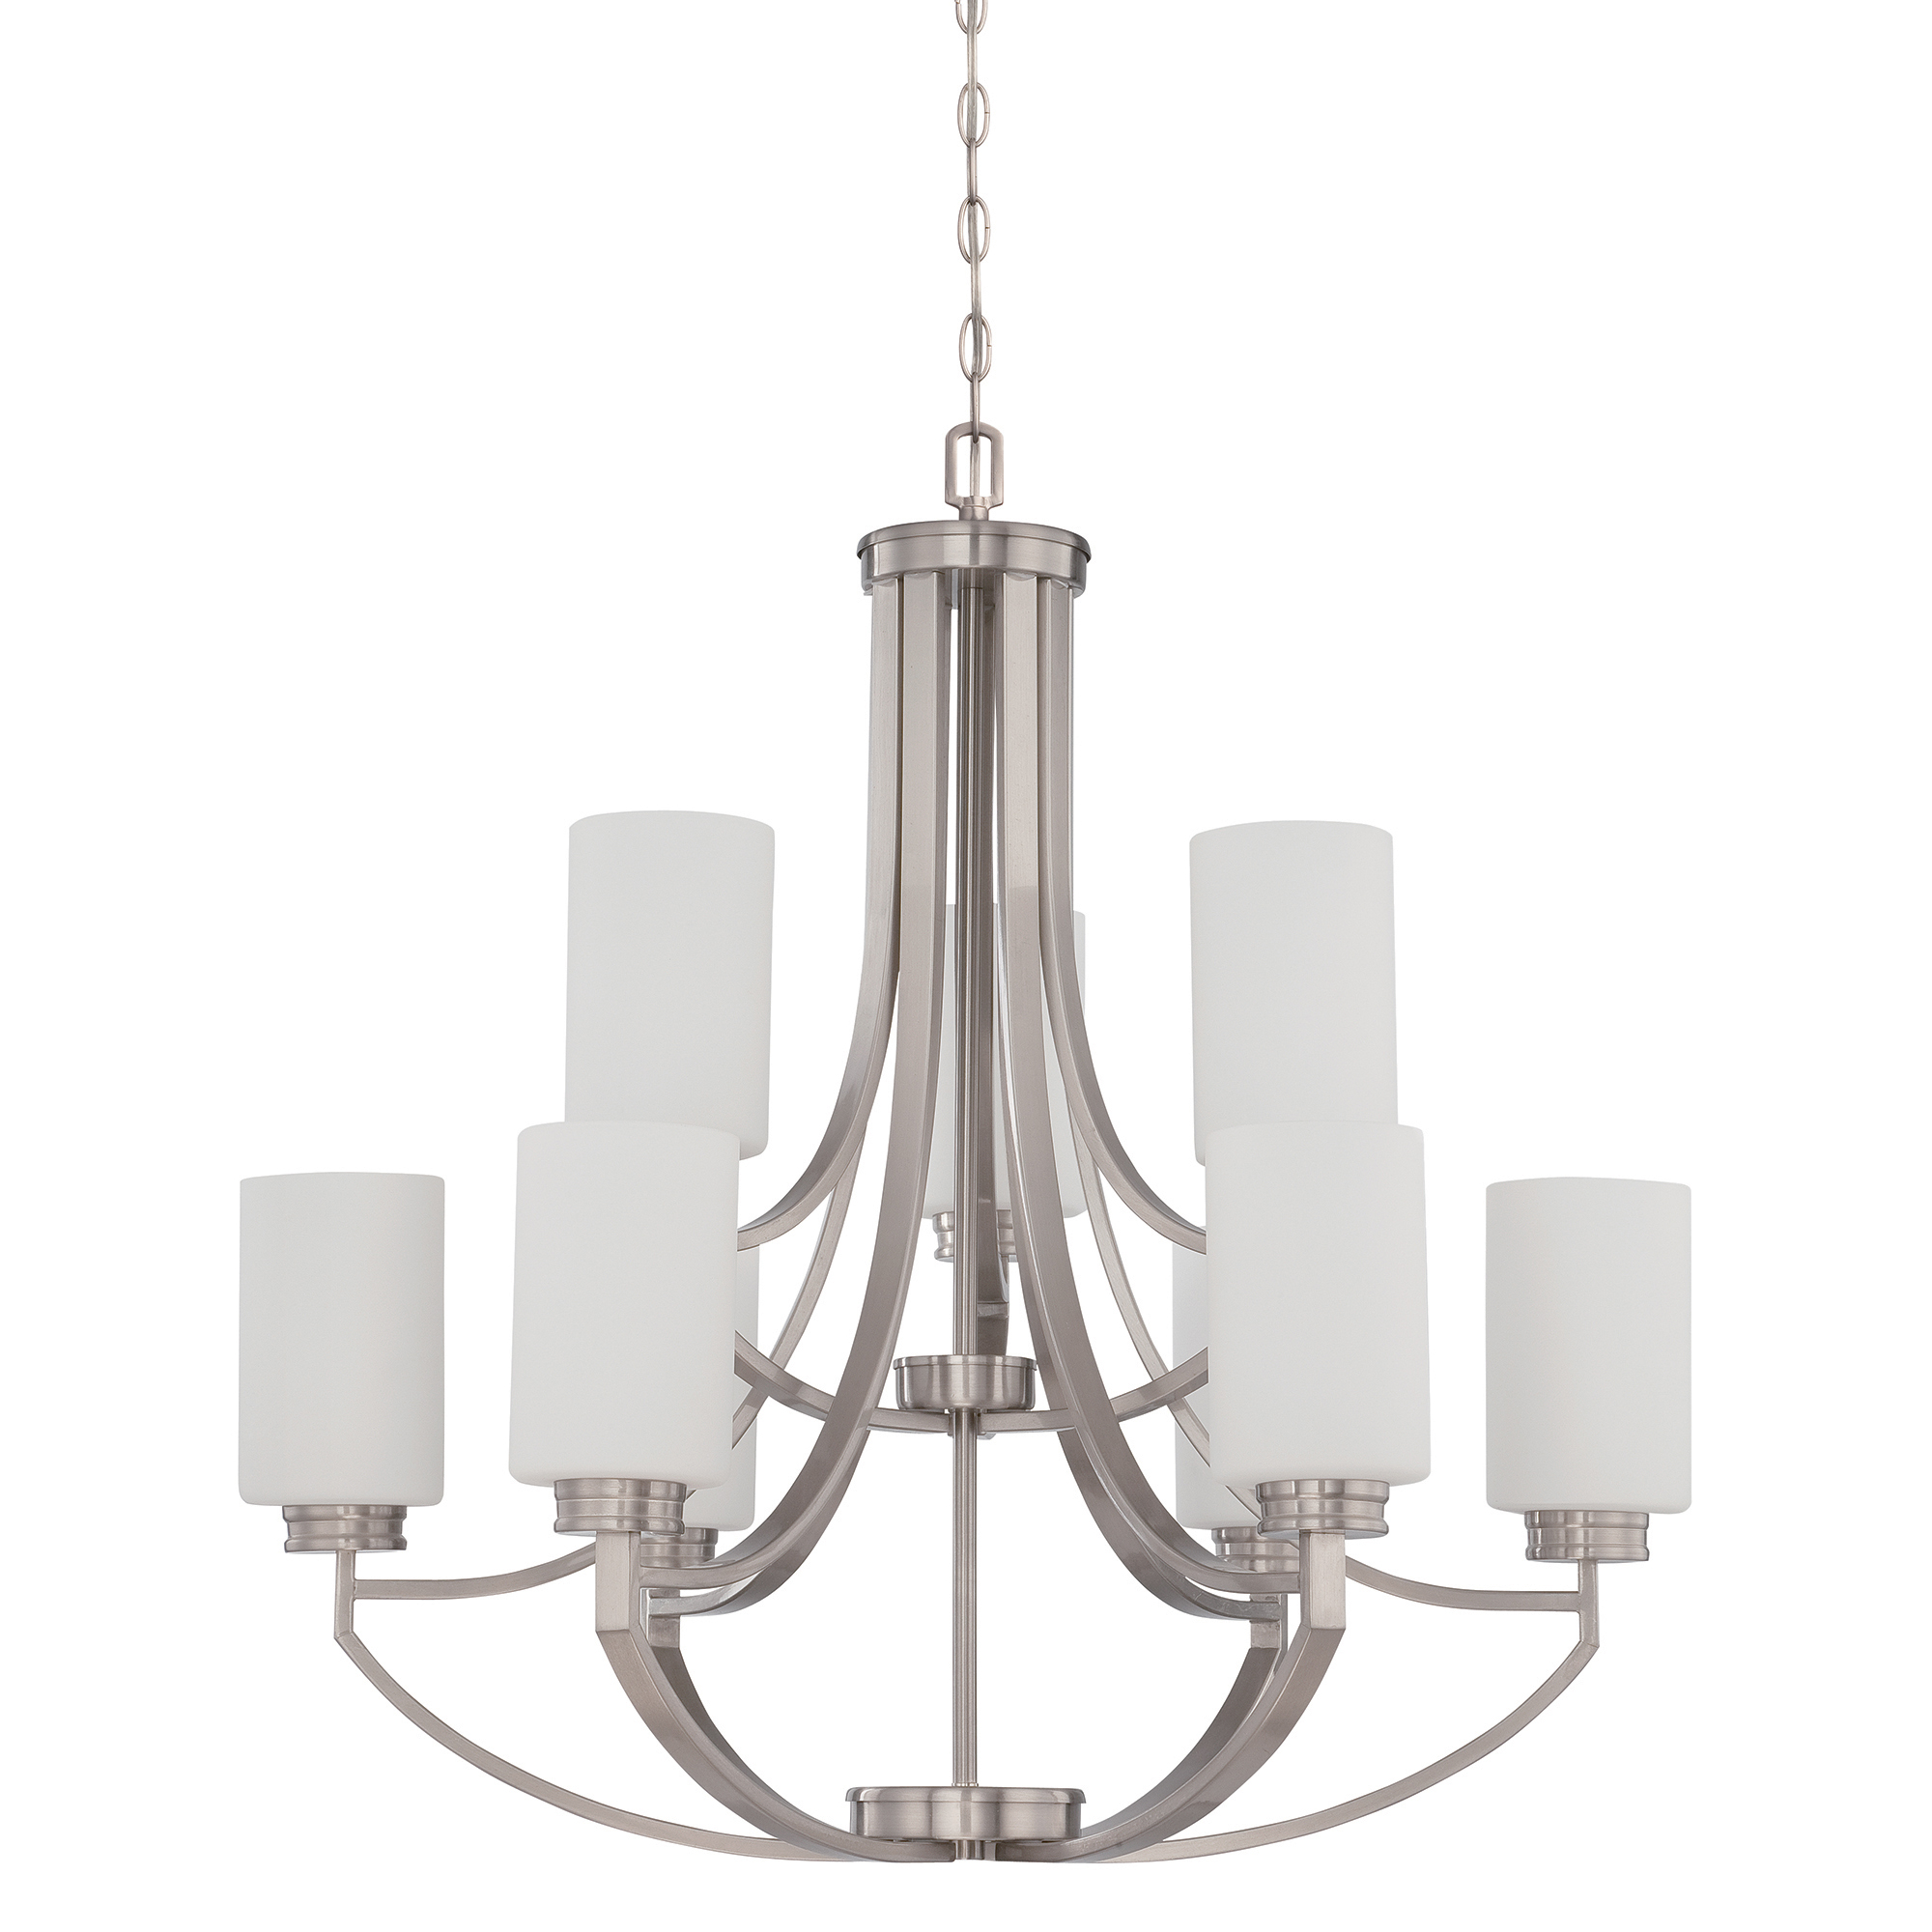 Sunset Lighting Dalton Nine Light Chandelier - Opal Etched Glass, Dimmable - With Bright Satin Nickel Finish